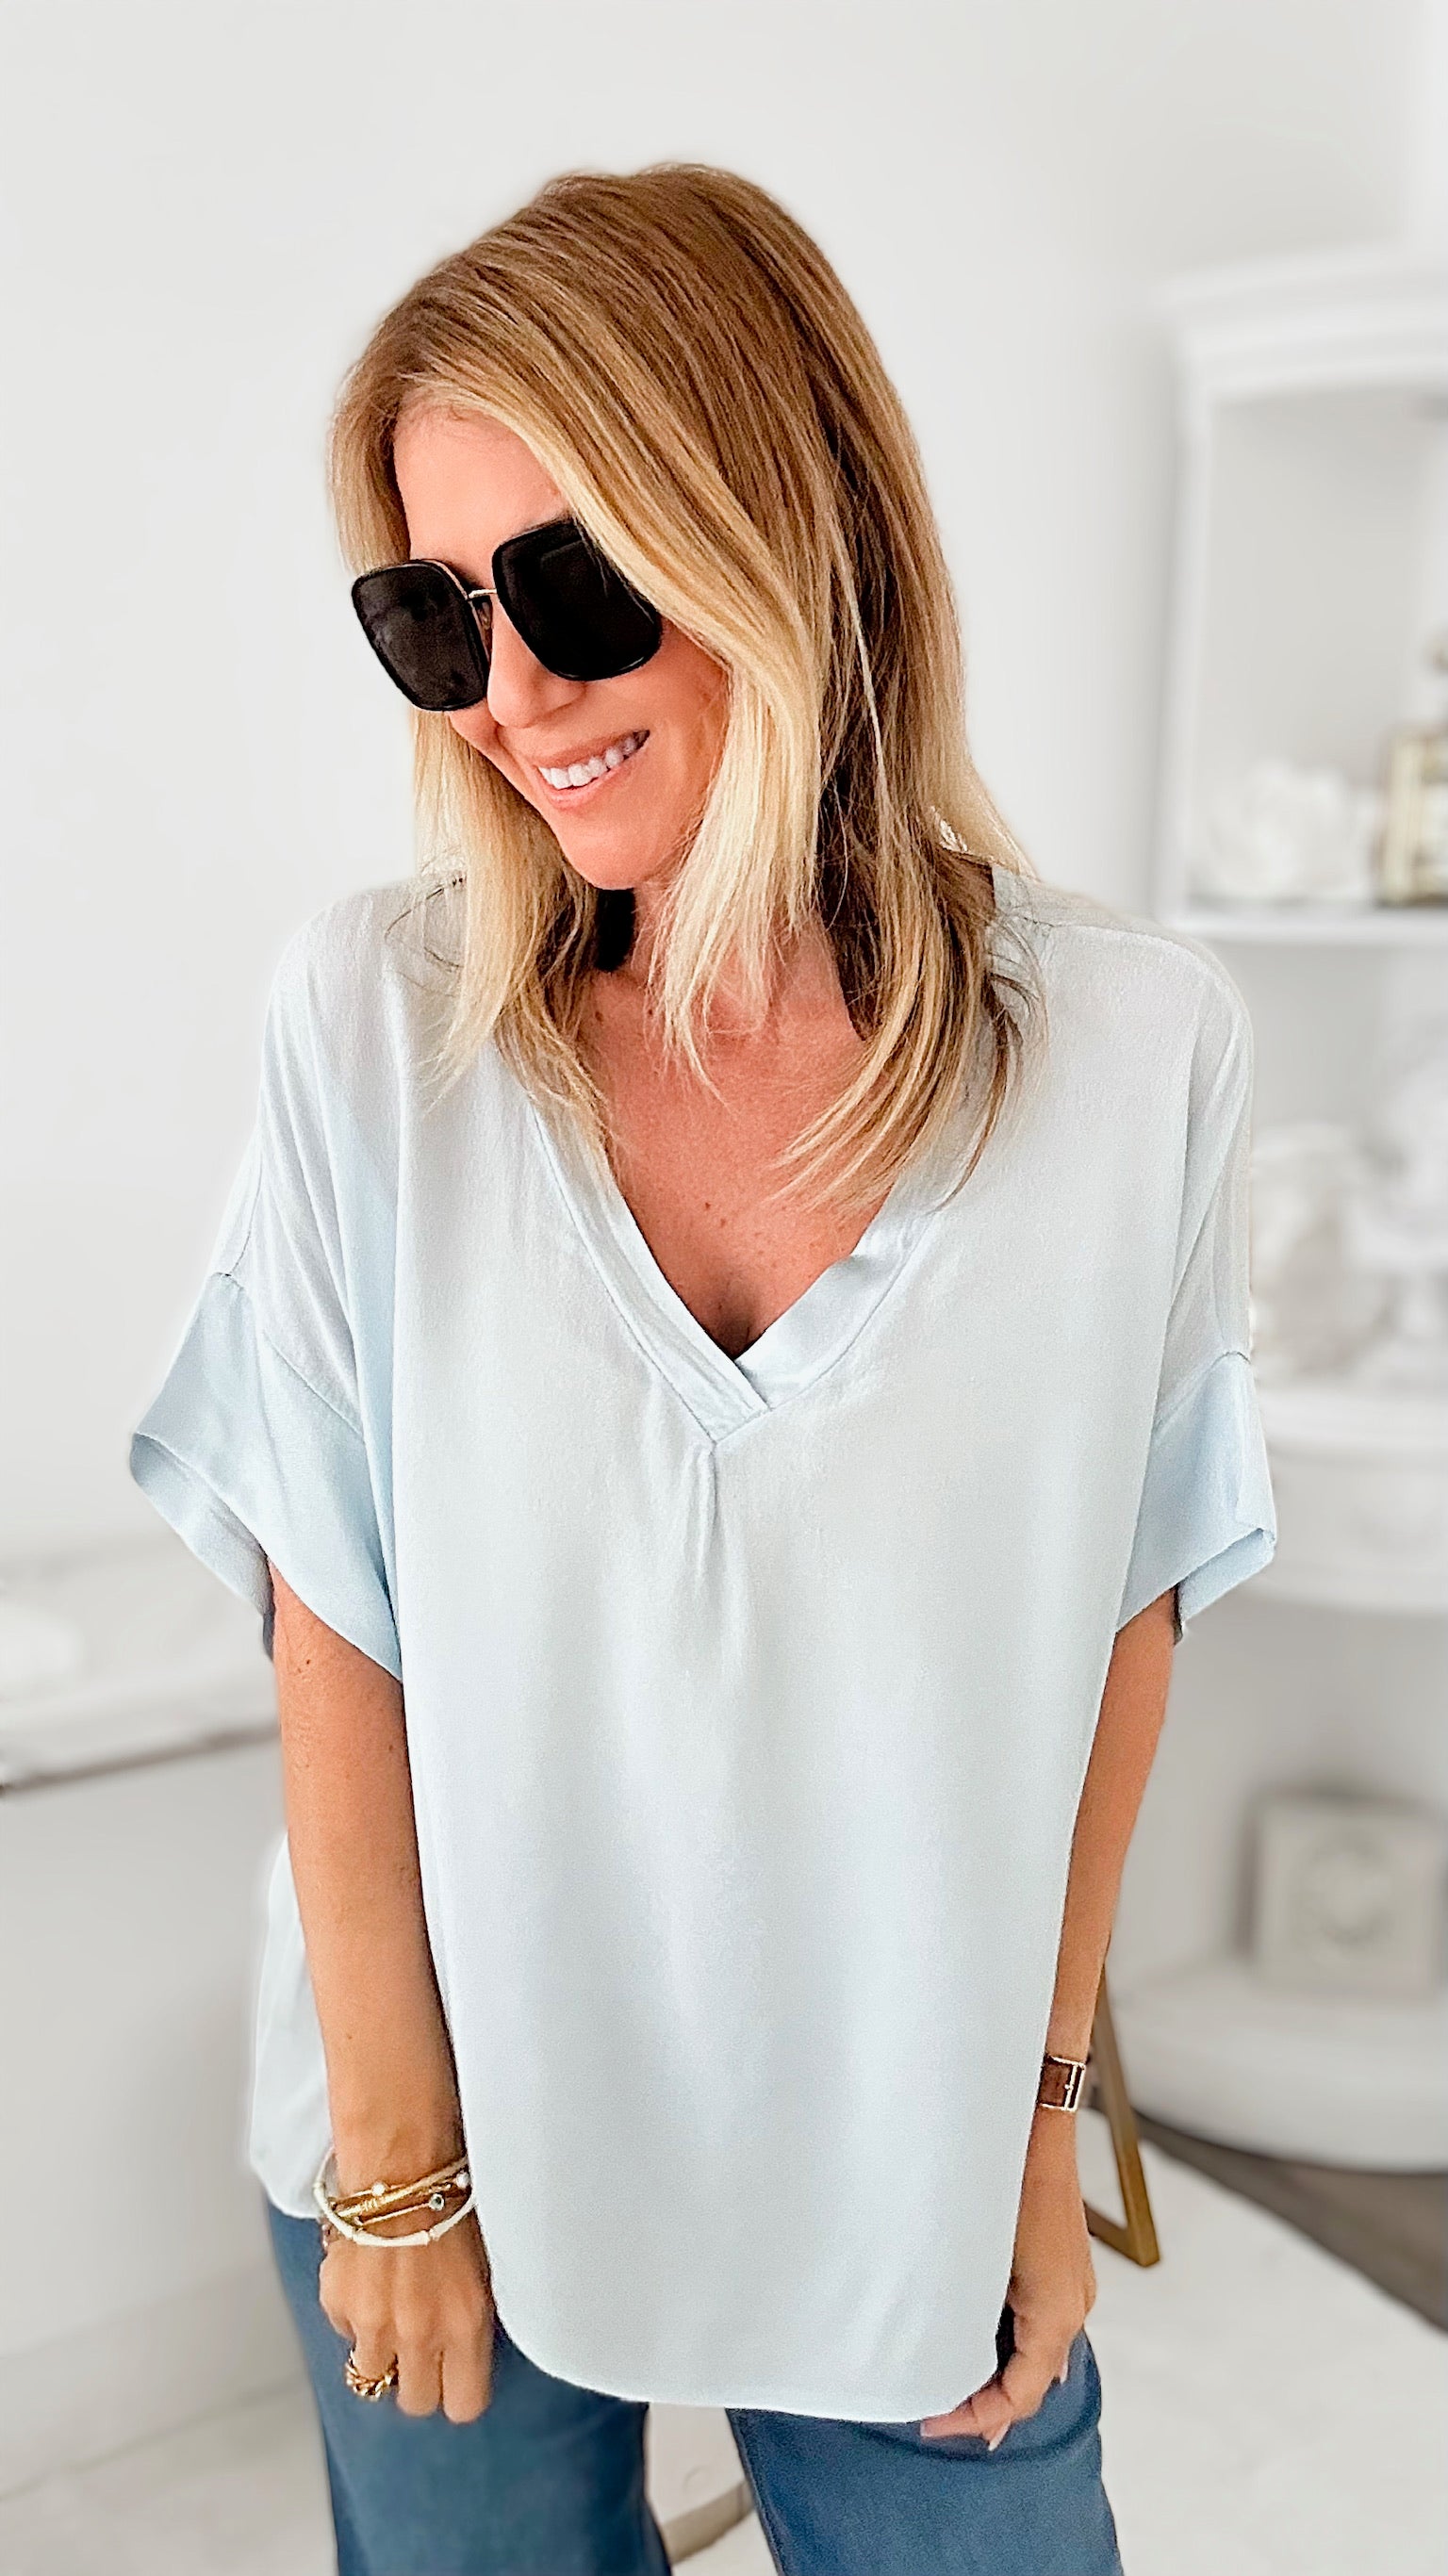 One Fine Day Italian V Neck Top - Powder Blue-110 Short Sleeve Tops-Yolly-Coastal Bloom Boutique, find the trendiest versions of the popular styles and looks Located in Indialantic, FL